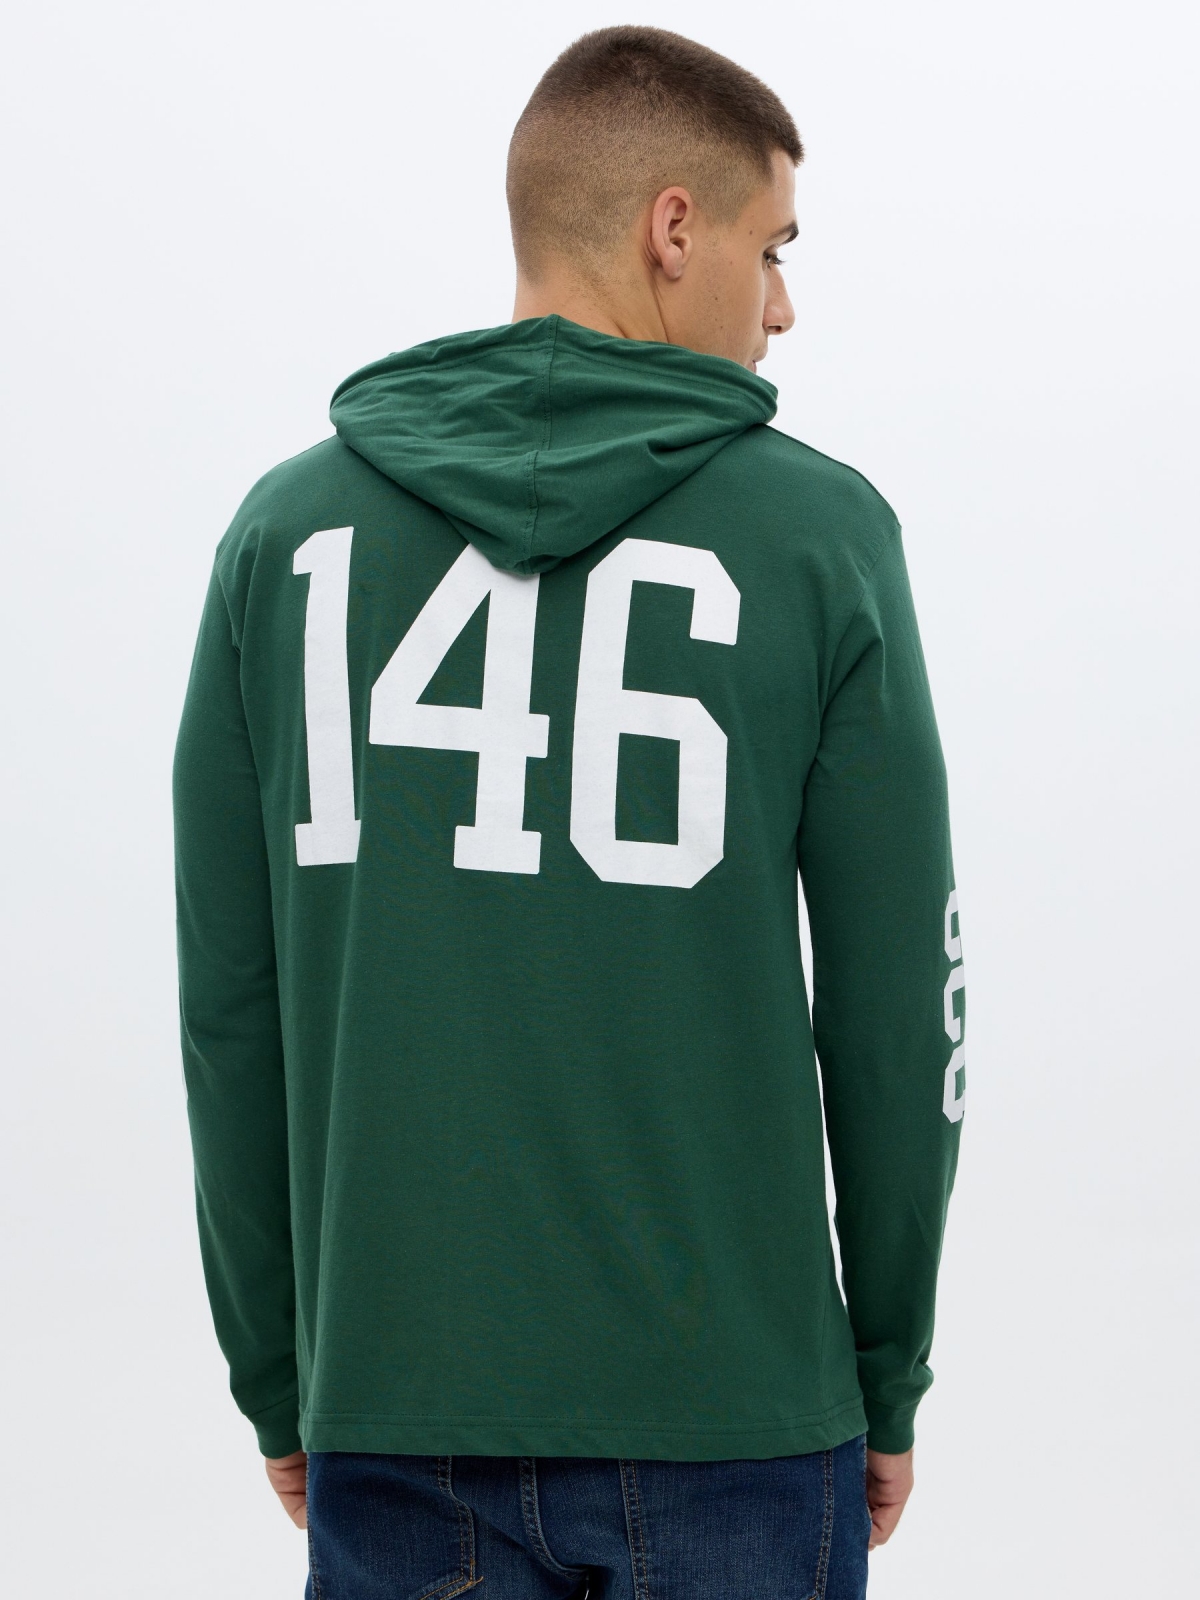 College hooded t-shirt green middle back view